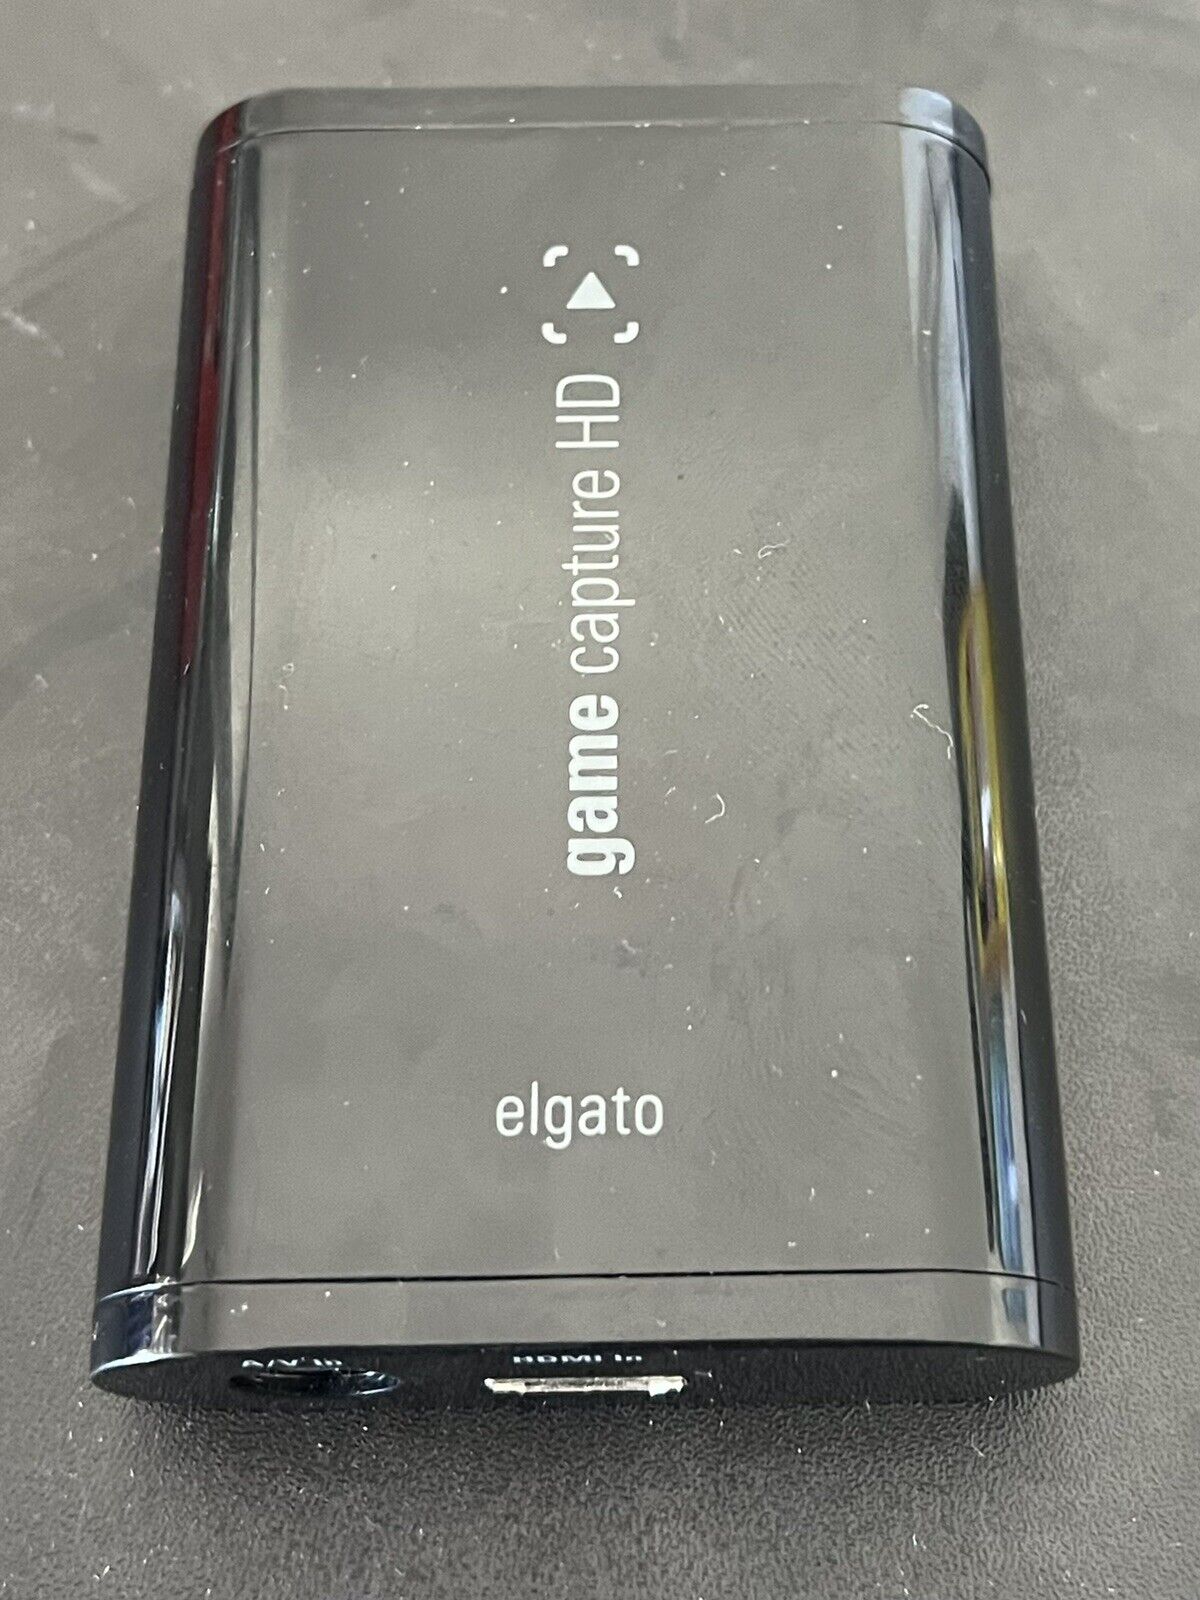 Elgato HD High Definition Game Capture Recorder Tested Works 